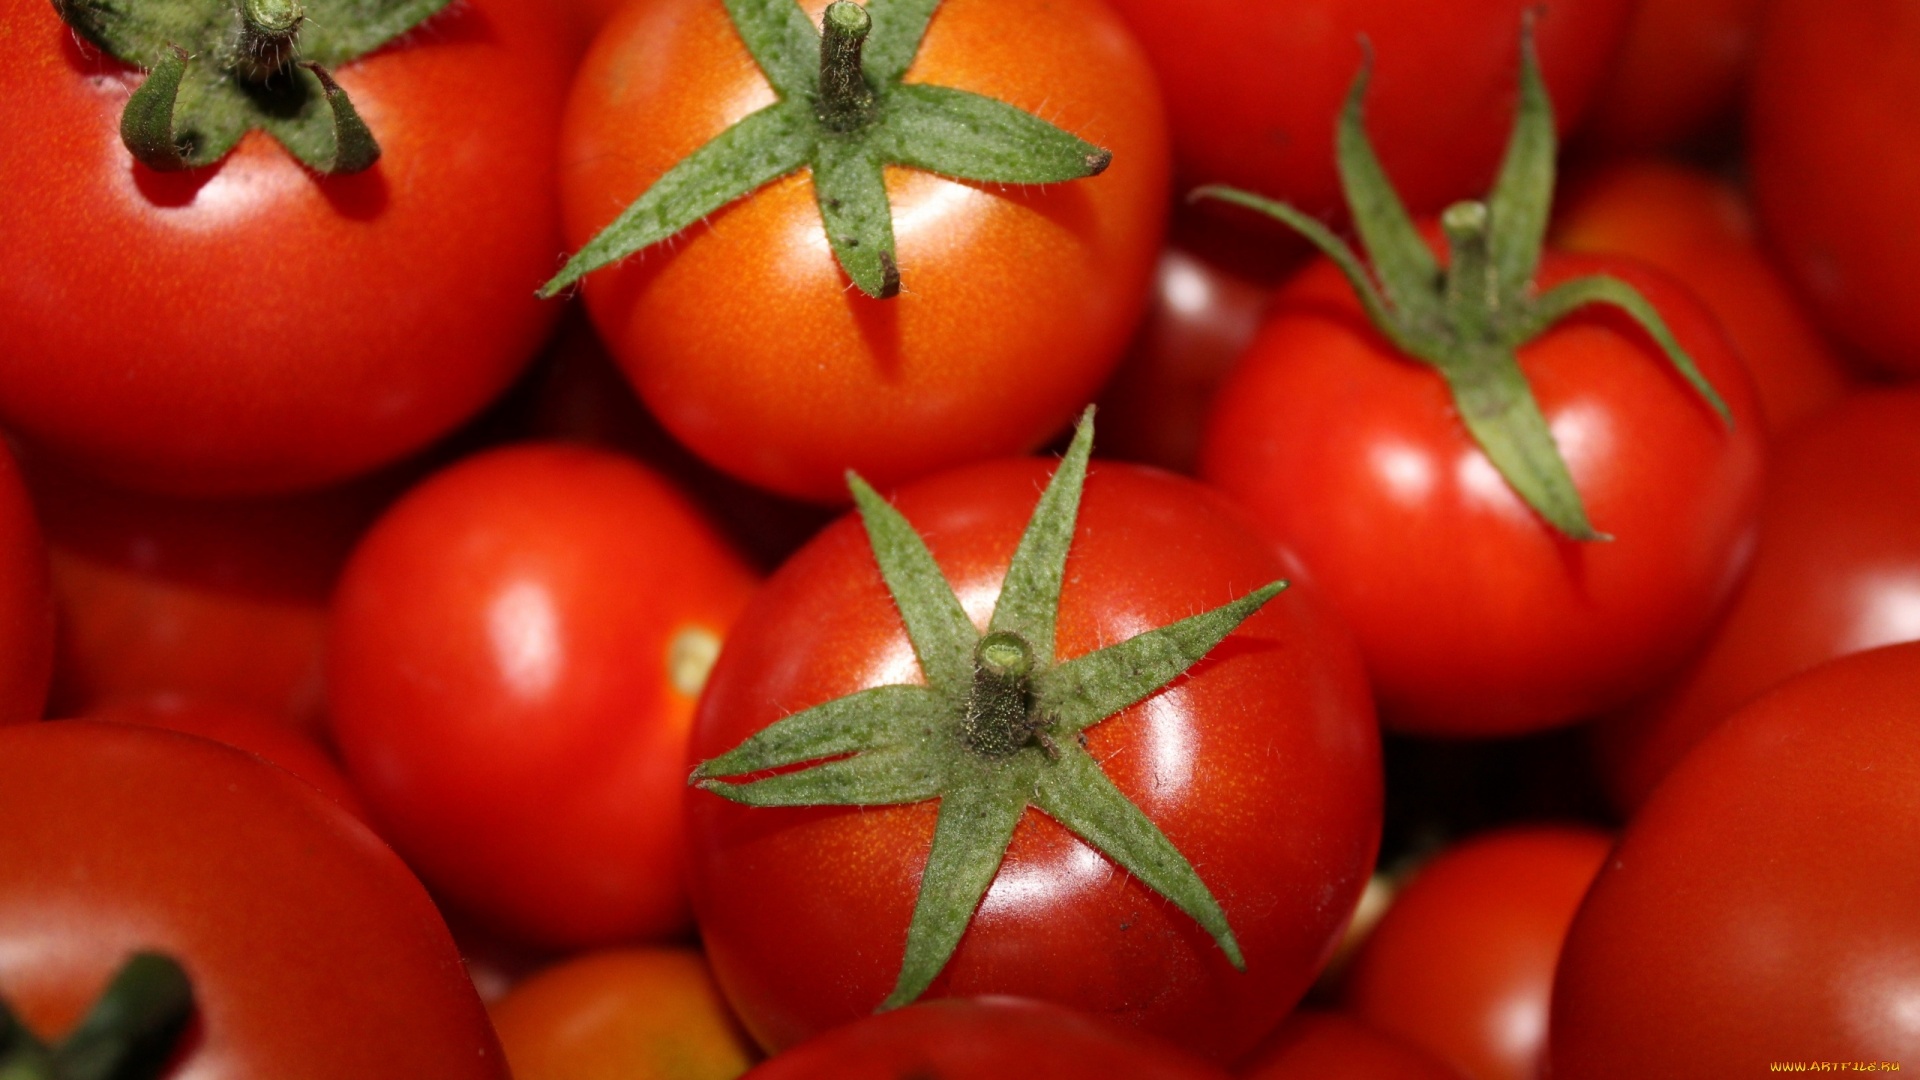 Tomatoes Wallpaper Picture hd